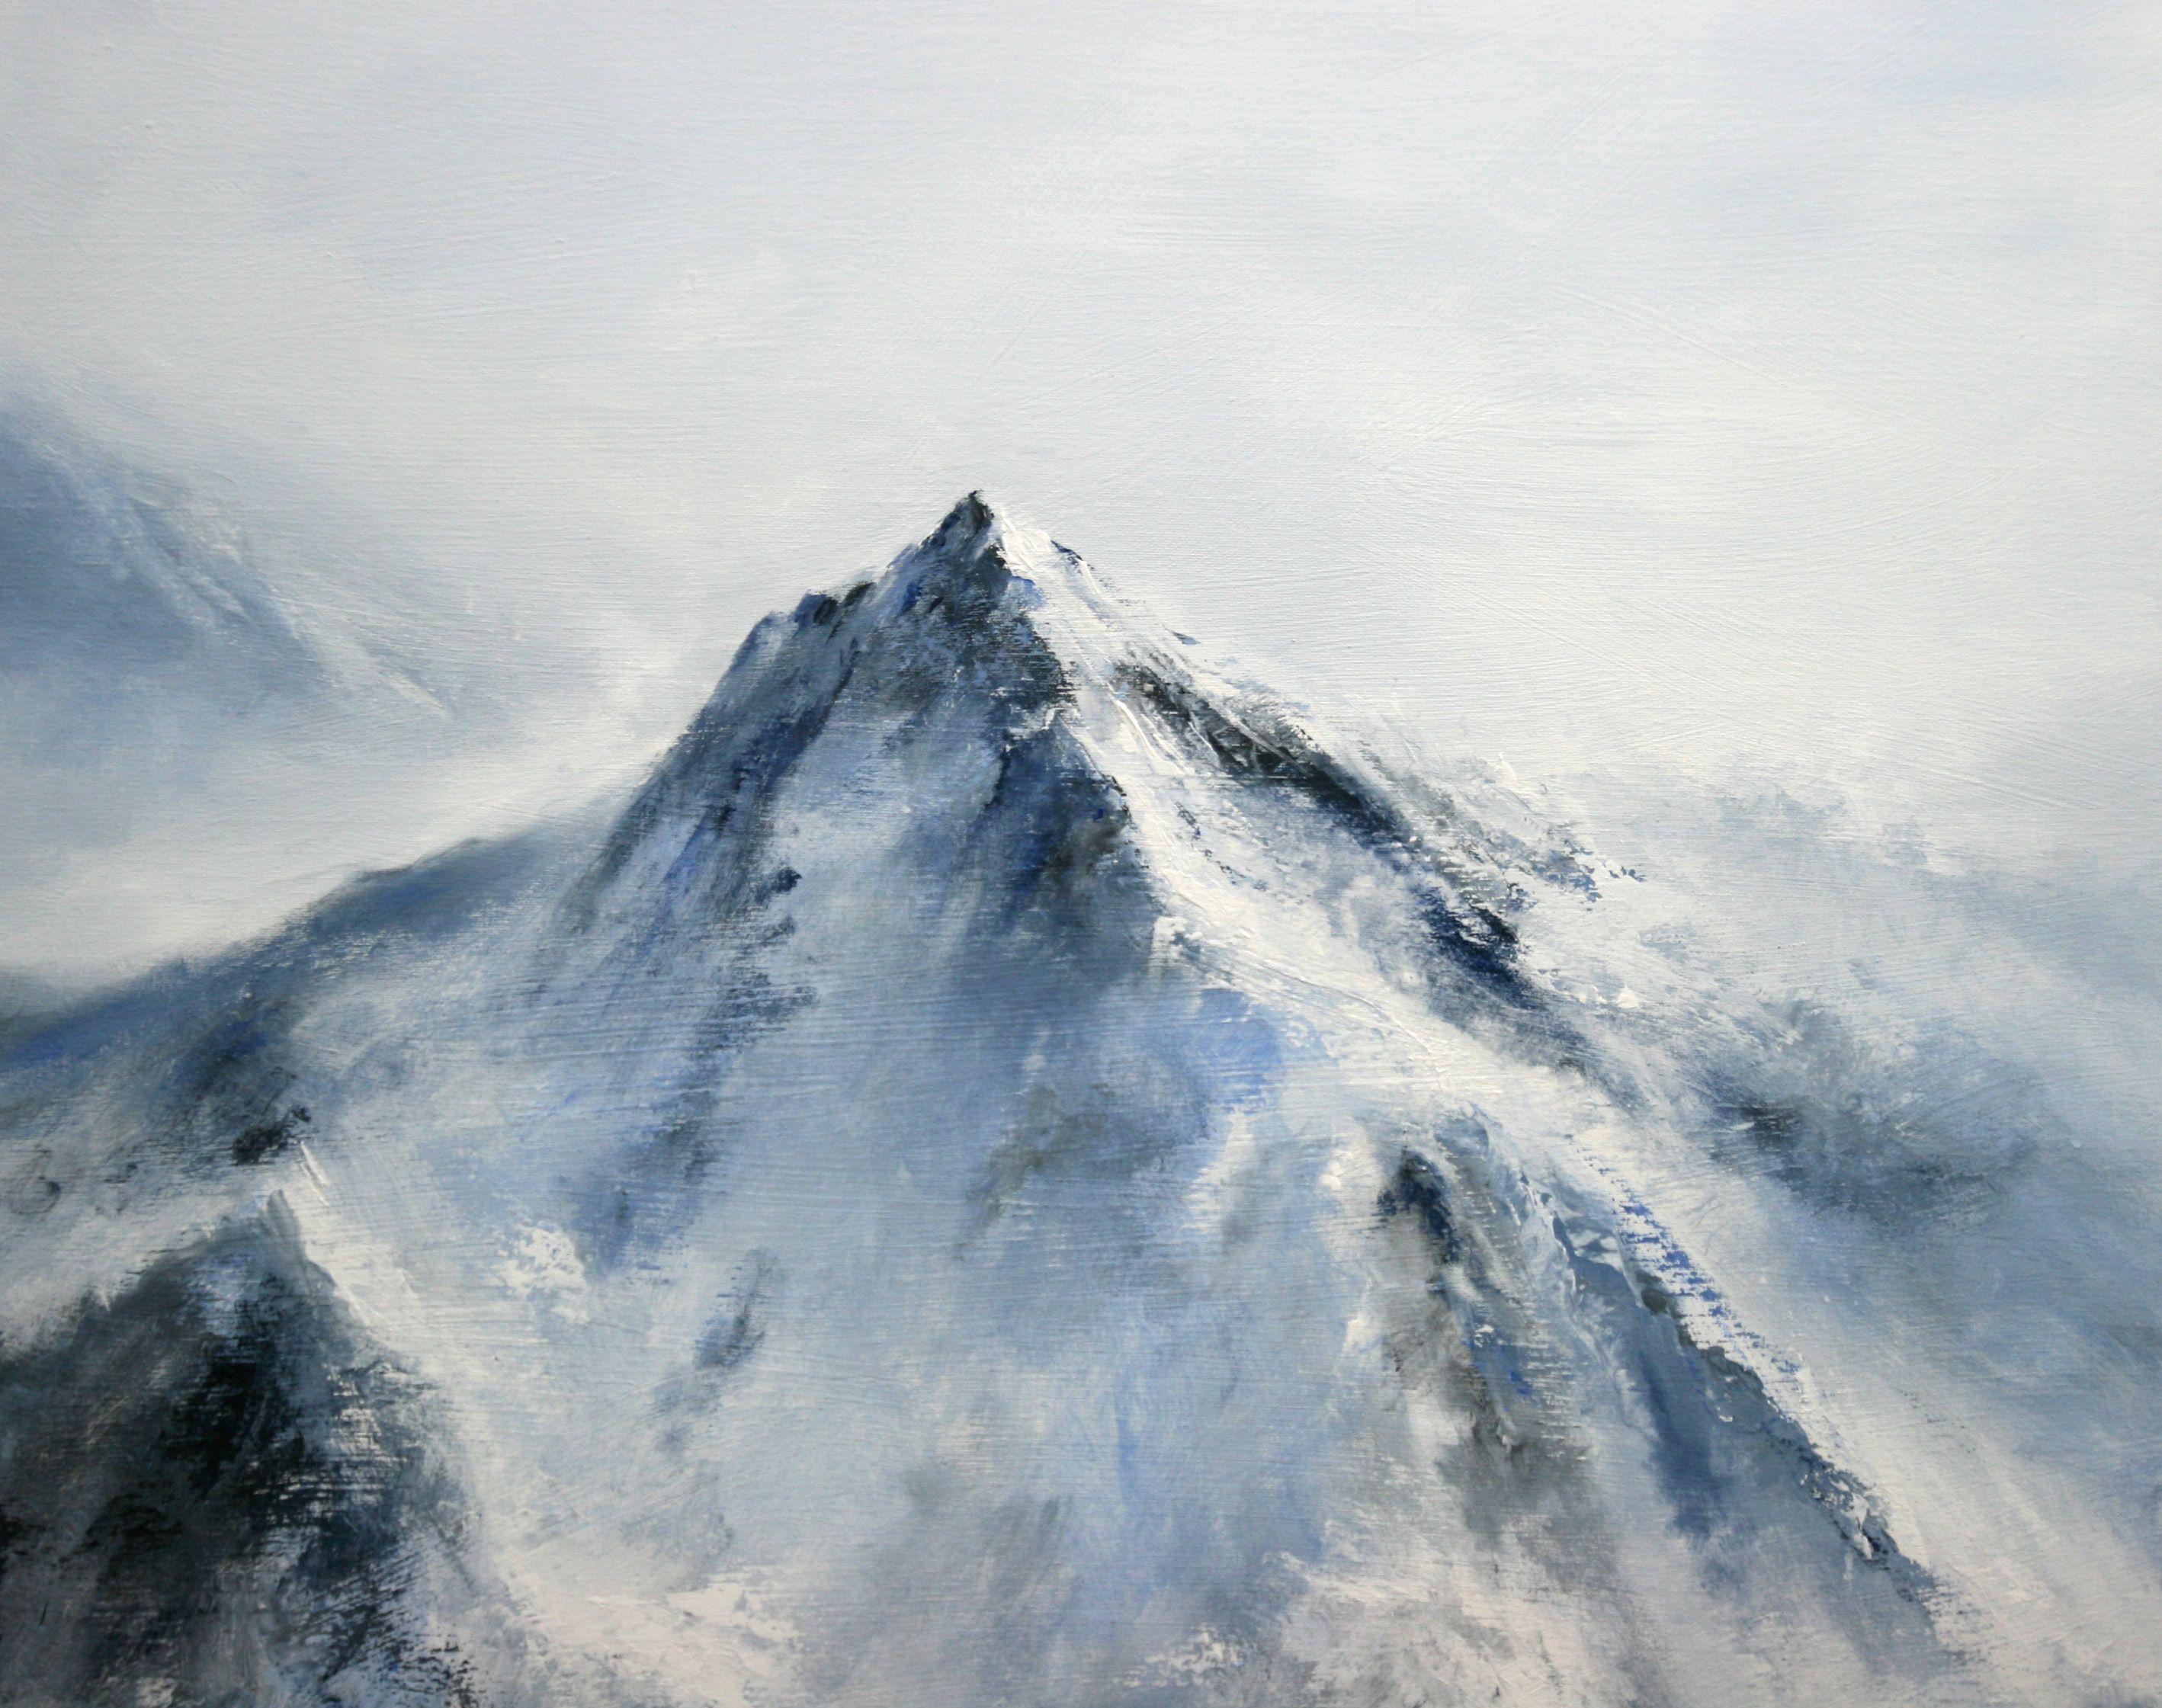 This painting is an imaginary landscape but inspired by the mountains in the Alps.  The painting is done on stretched canvas using top quality acrylic paints and materials. It was painted in multiple layers with palette knife and brushes.  The